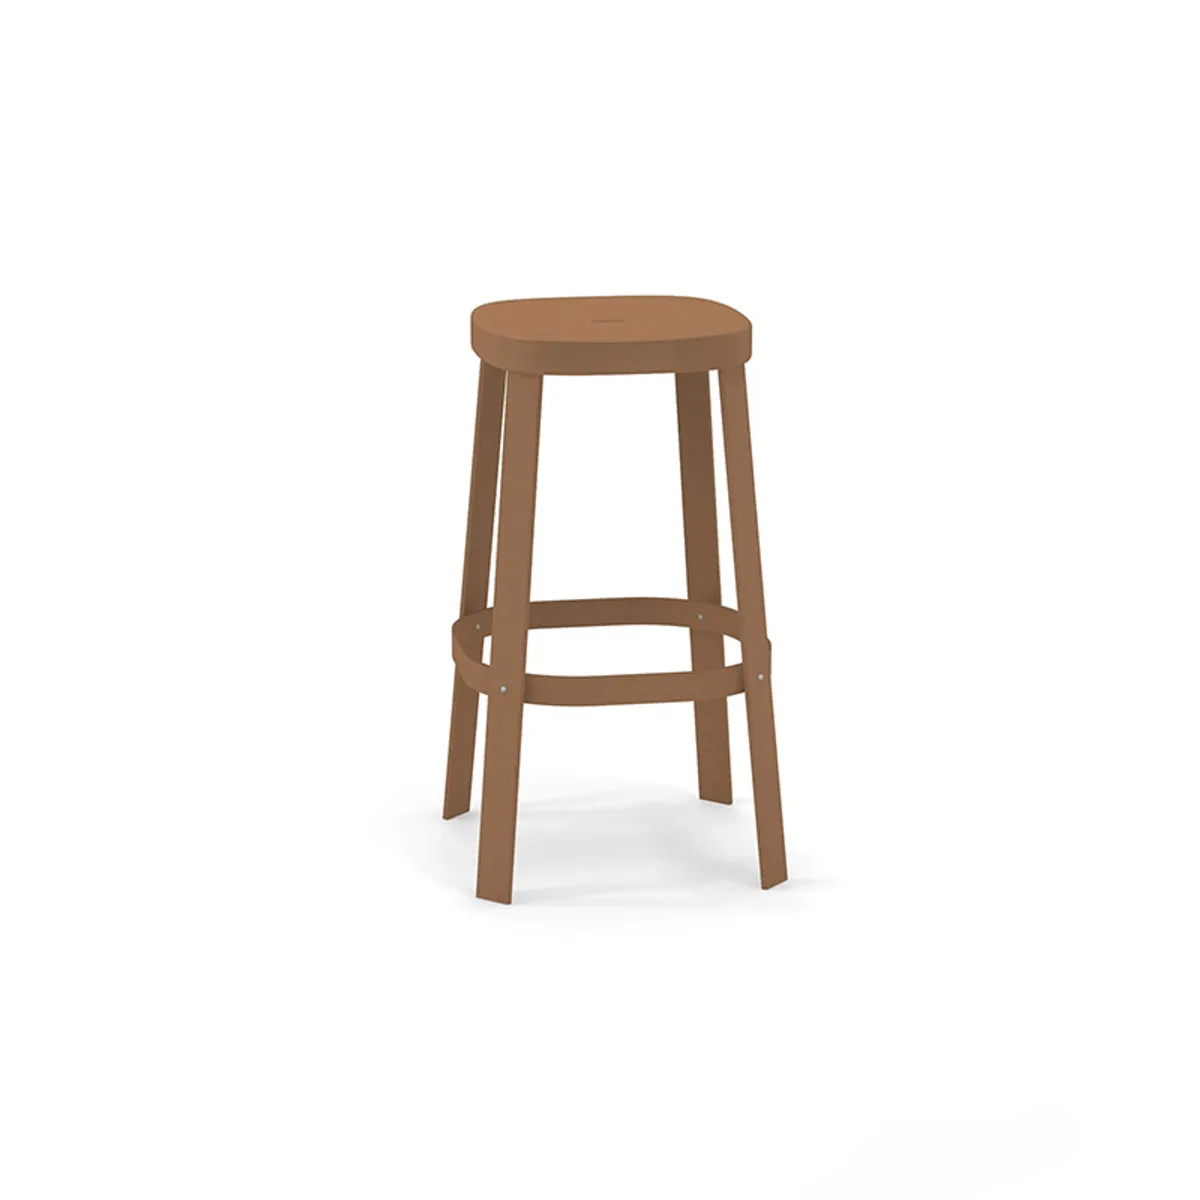 Thor Stool Outdoor Furniture For Hospitality 020